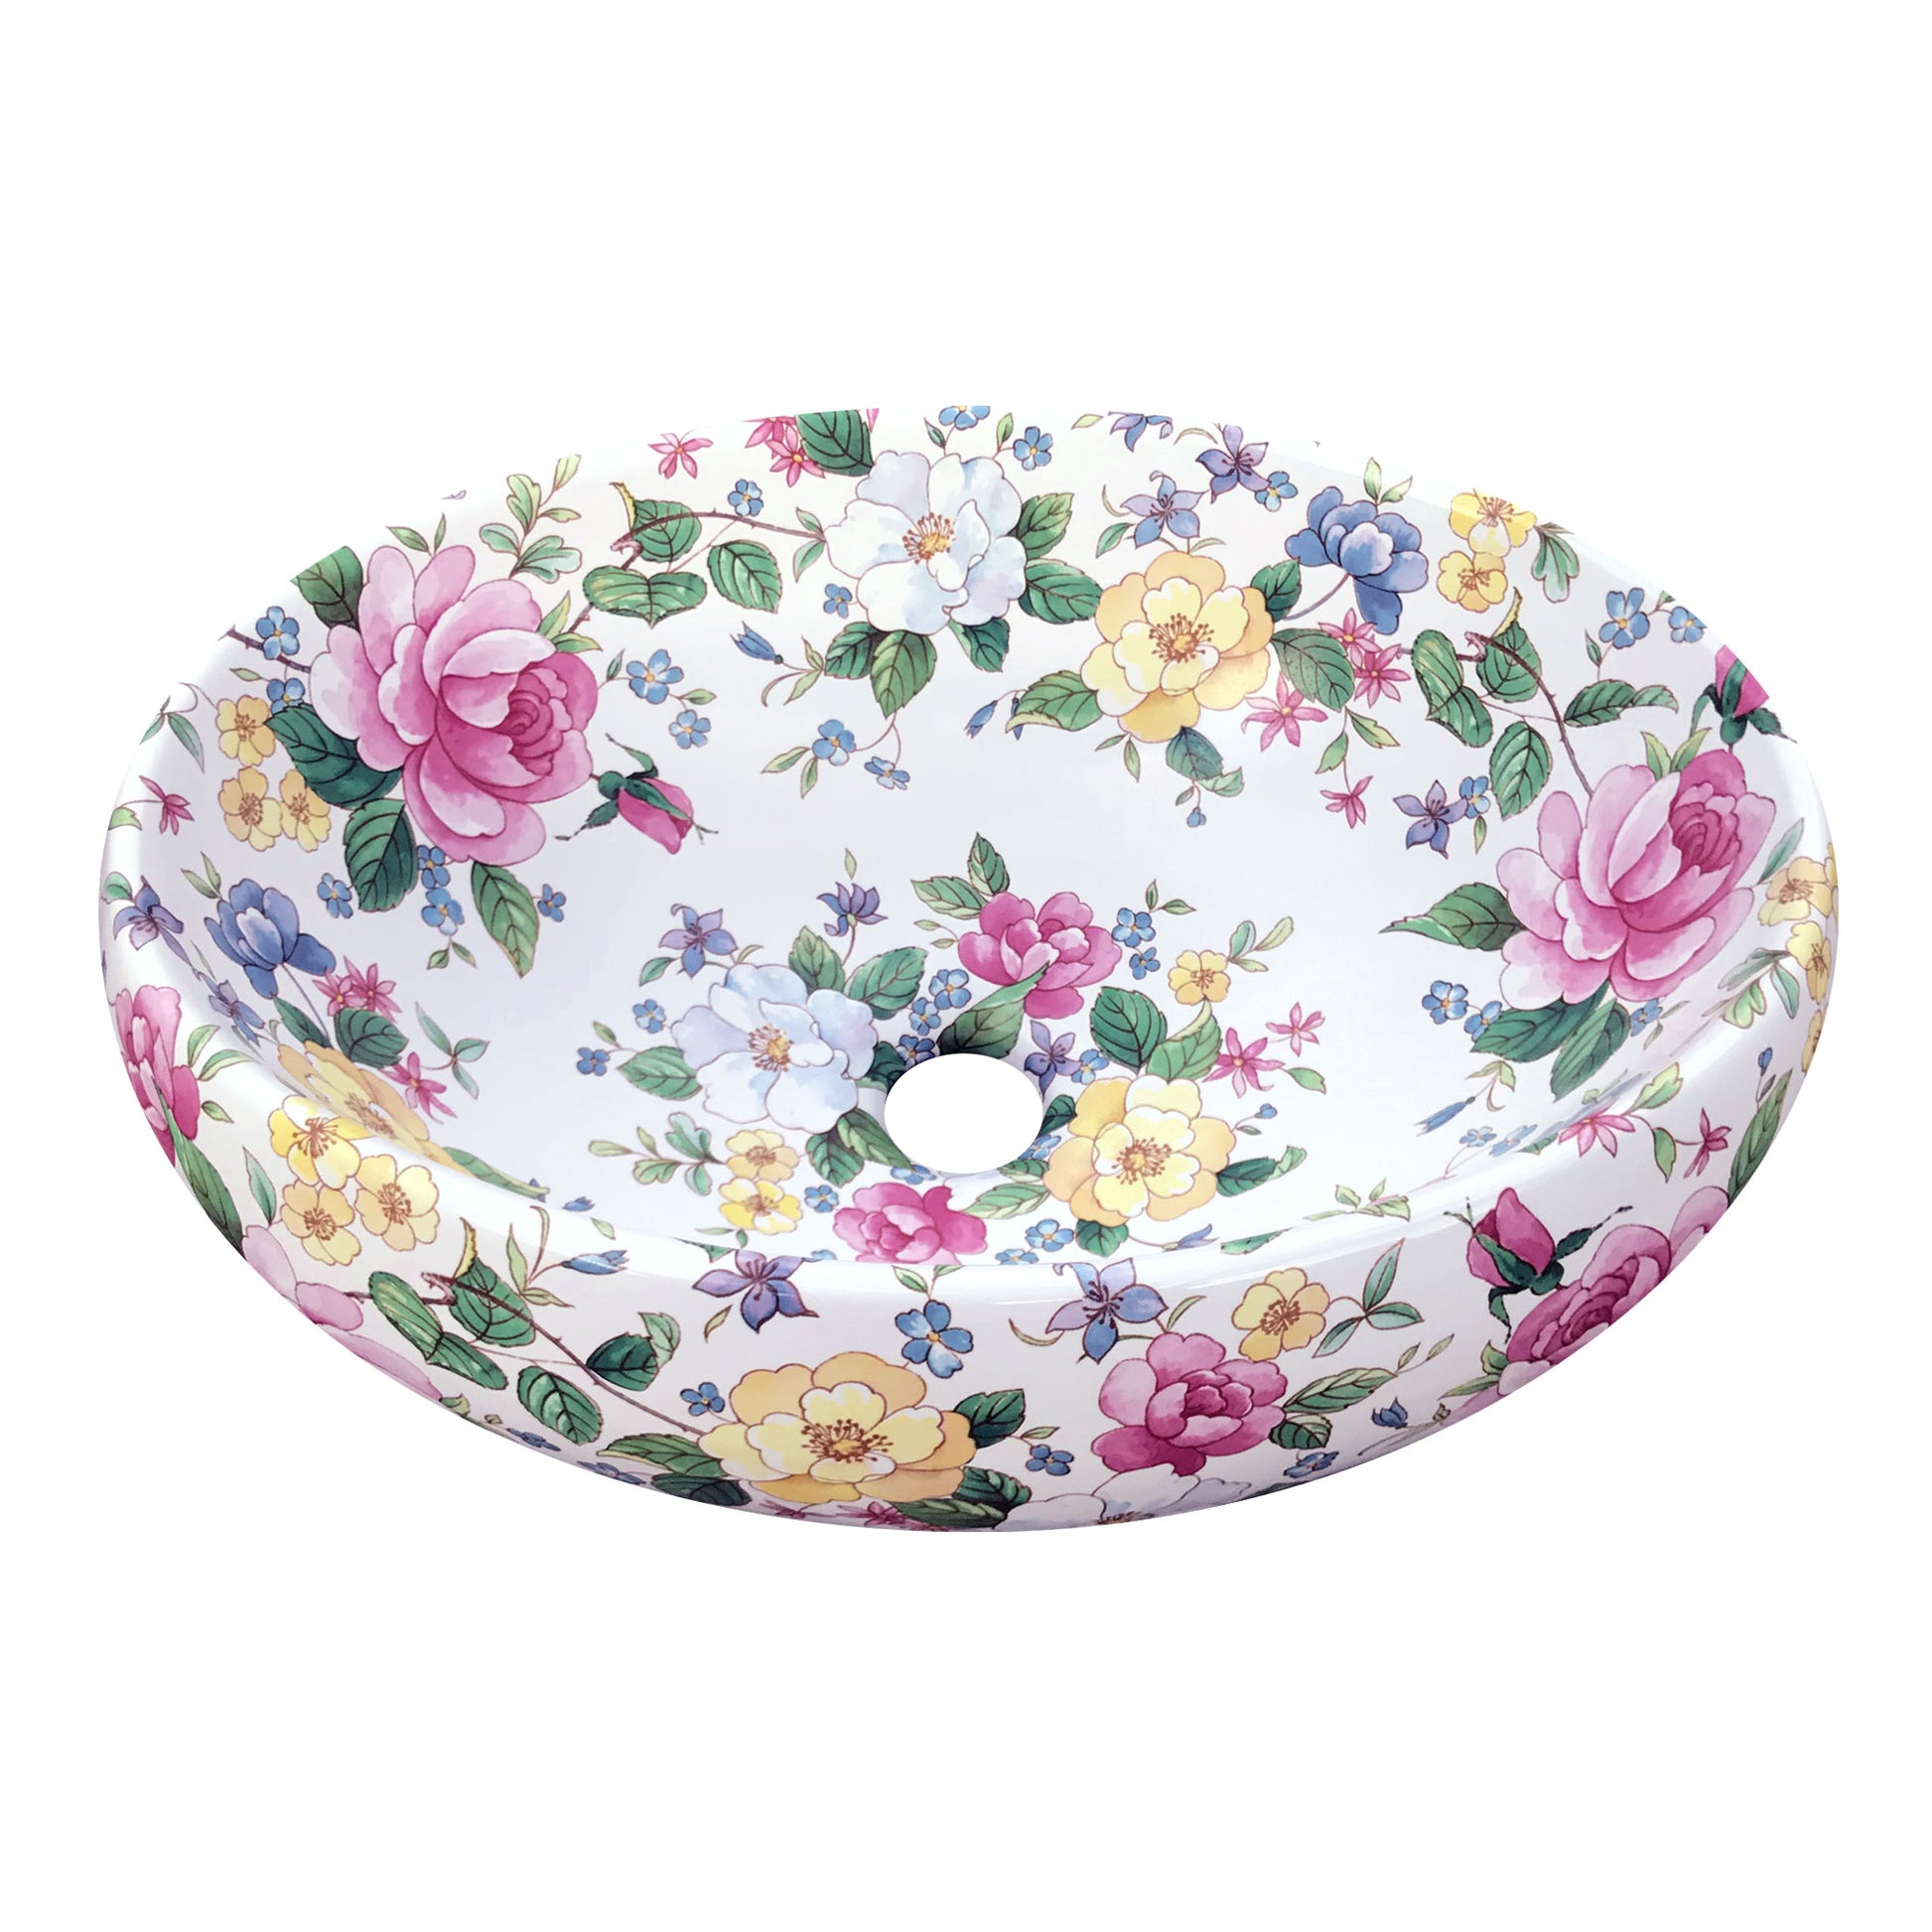 modern oval vessel sink painted with roses and flowers